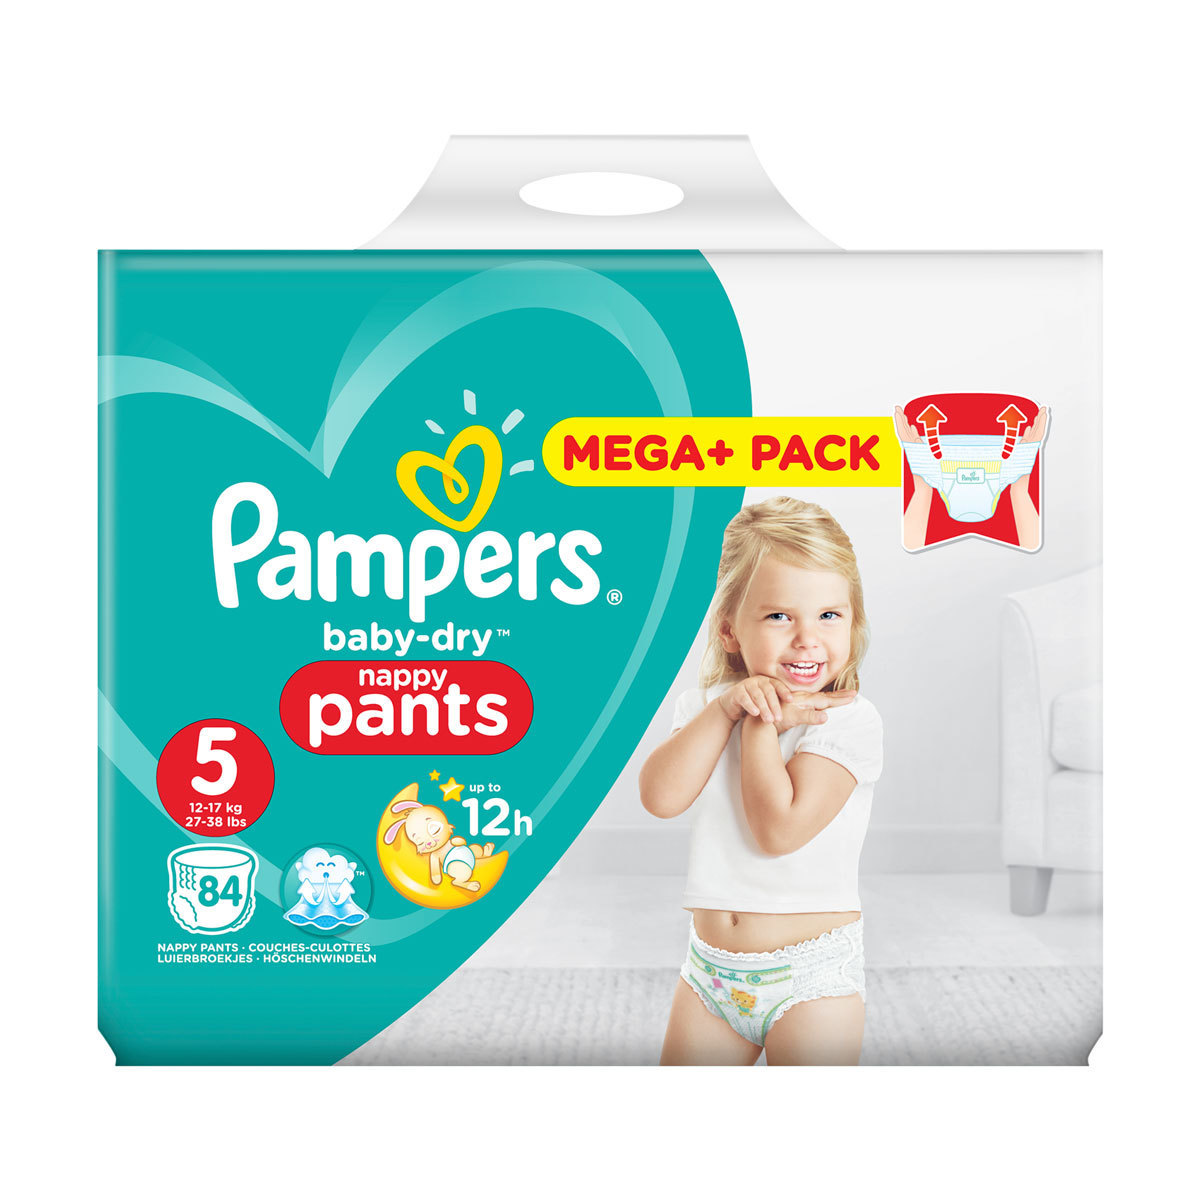 Pampers Baby-Dry Nappy Pants Size 5, 84 Mega+ Pack